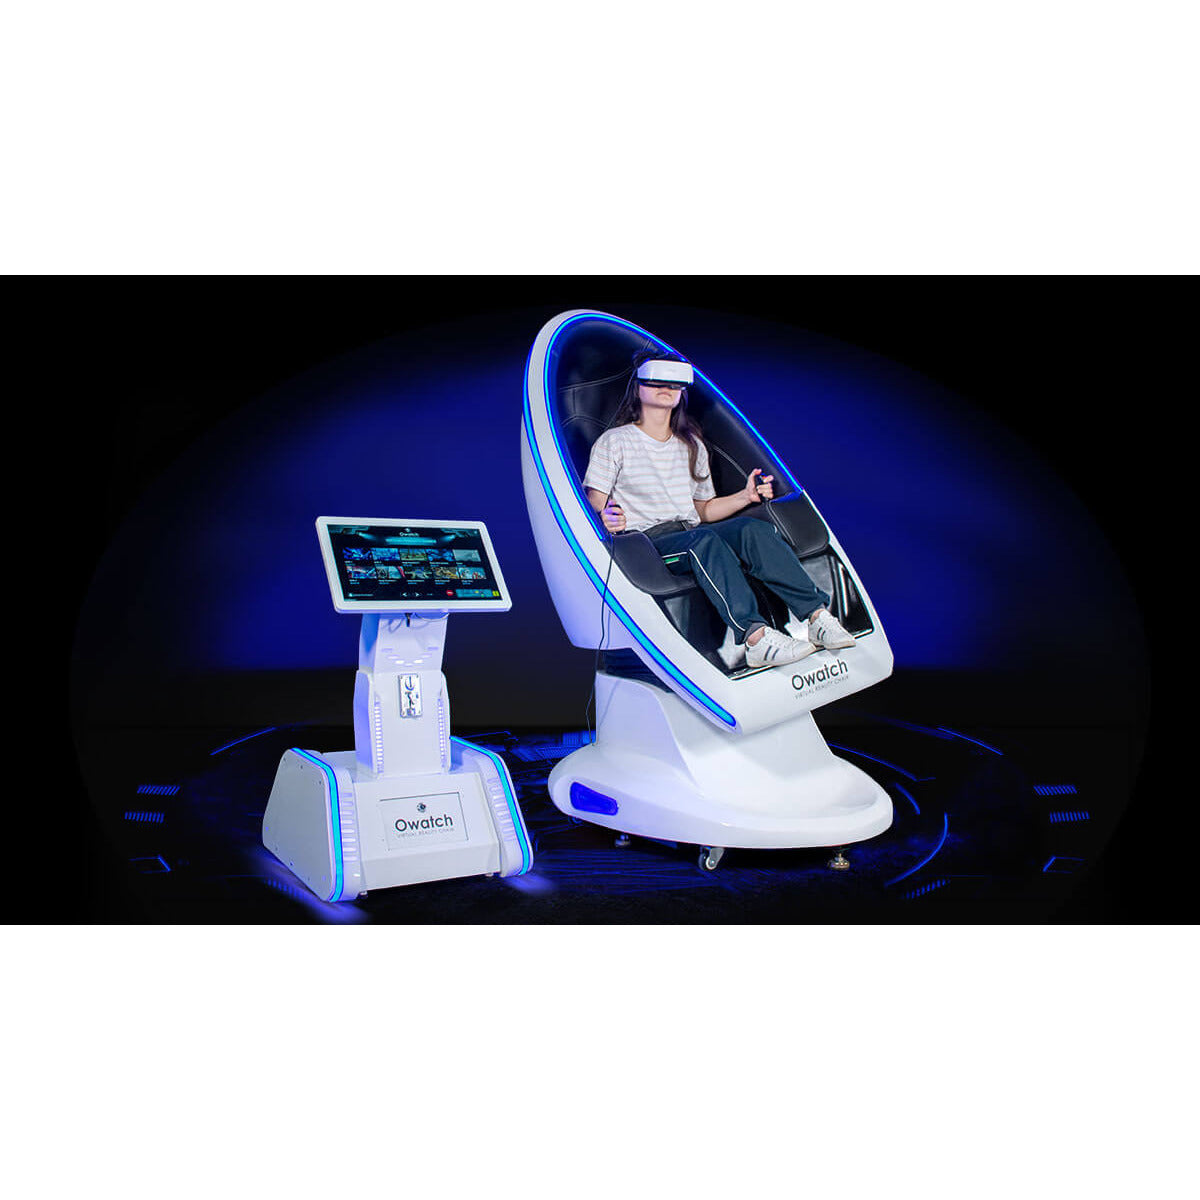 VR CHAIR 22 inch control panel with coin system